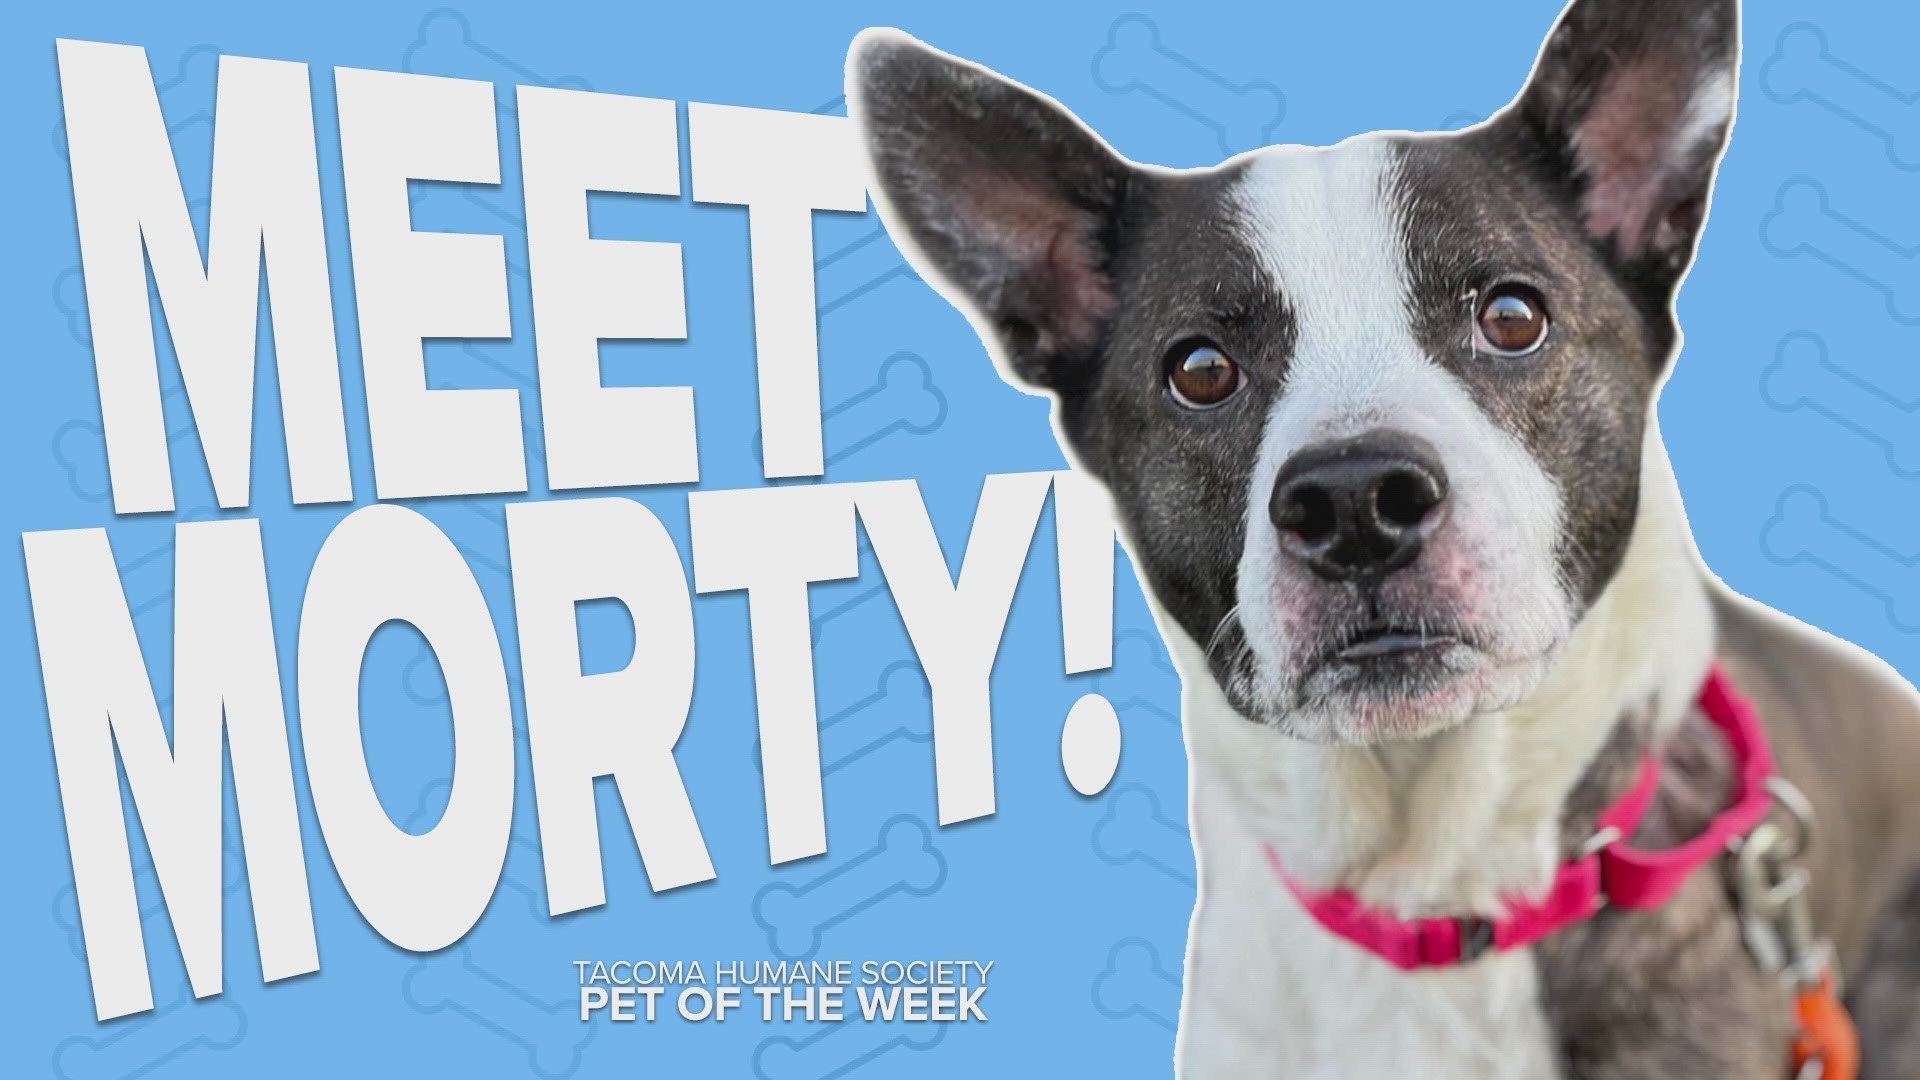 This week's featured rescue pet is Morty!